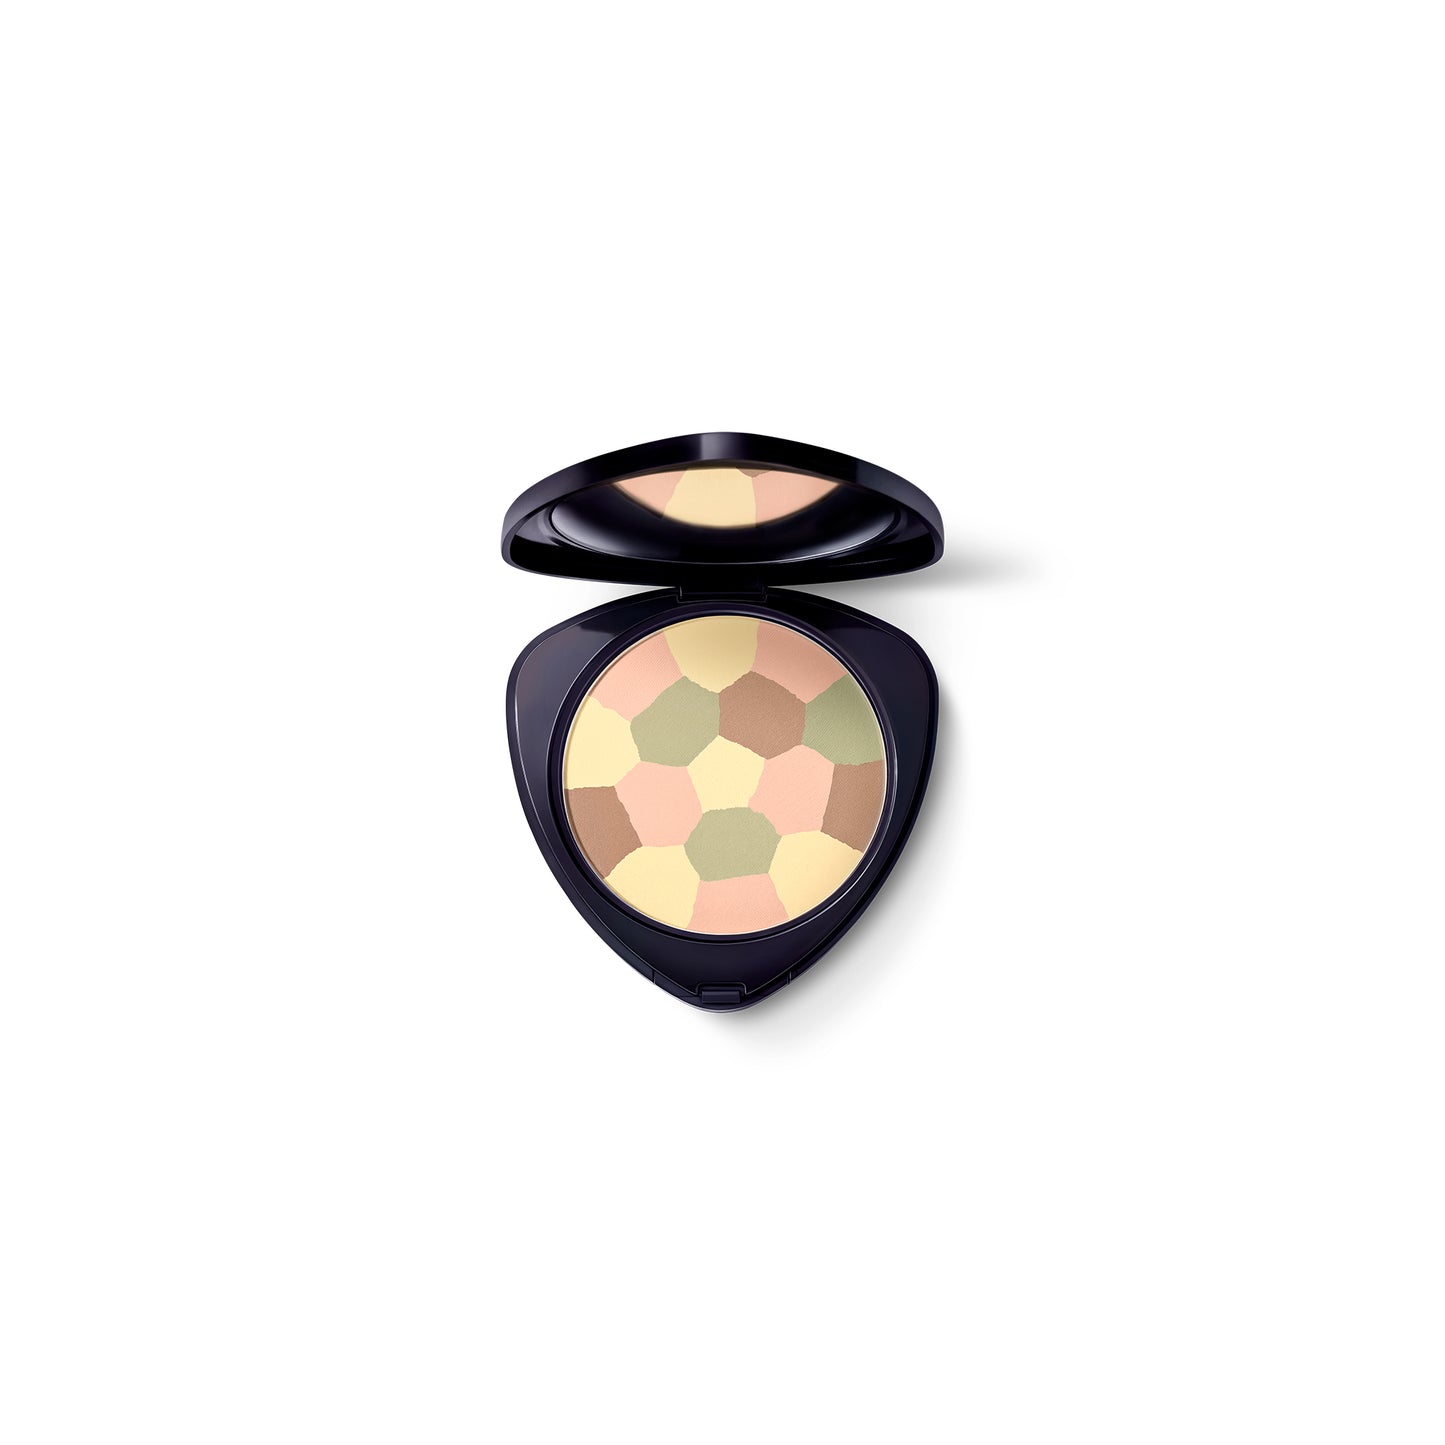 Load image into Gallery viewer, Dr. Hauschka Colour Correcting Powder 00 Translucent 8g
